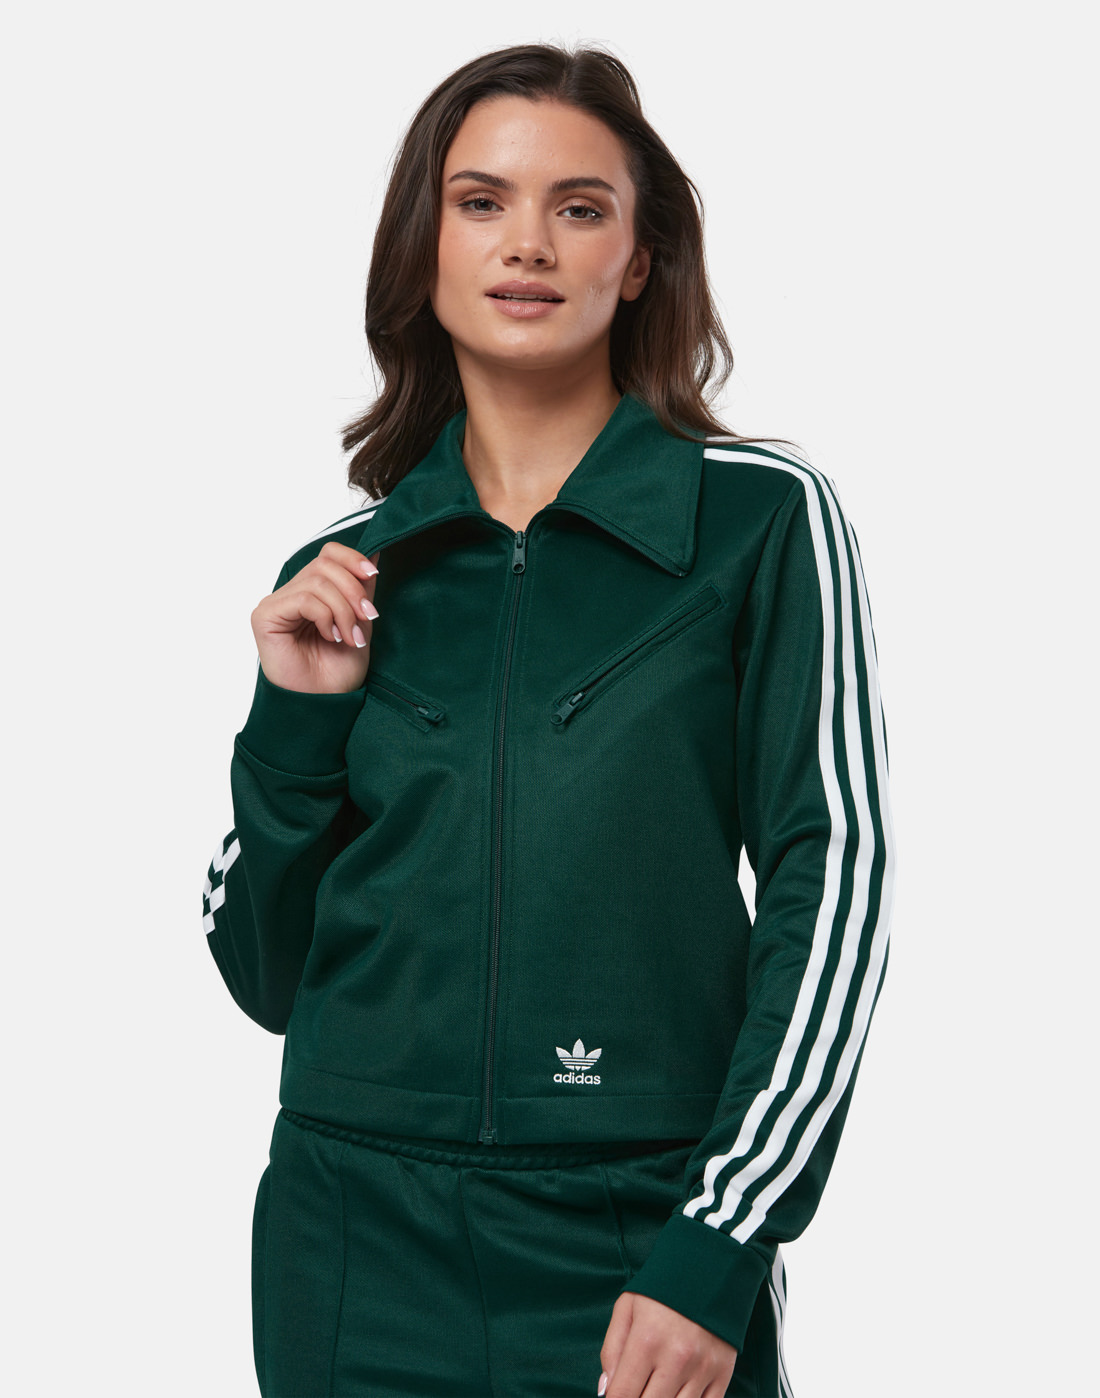 adidas Originals Womens Montreal Track Top - Green | Life Style Sports UK